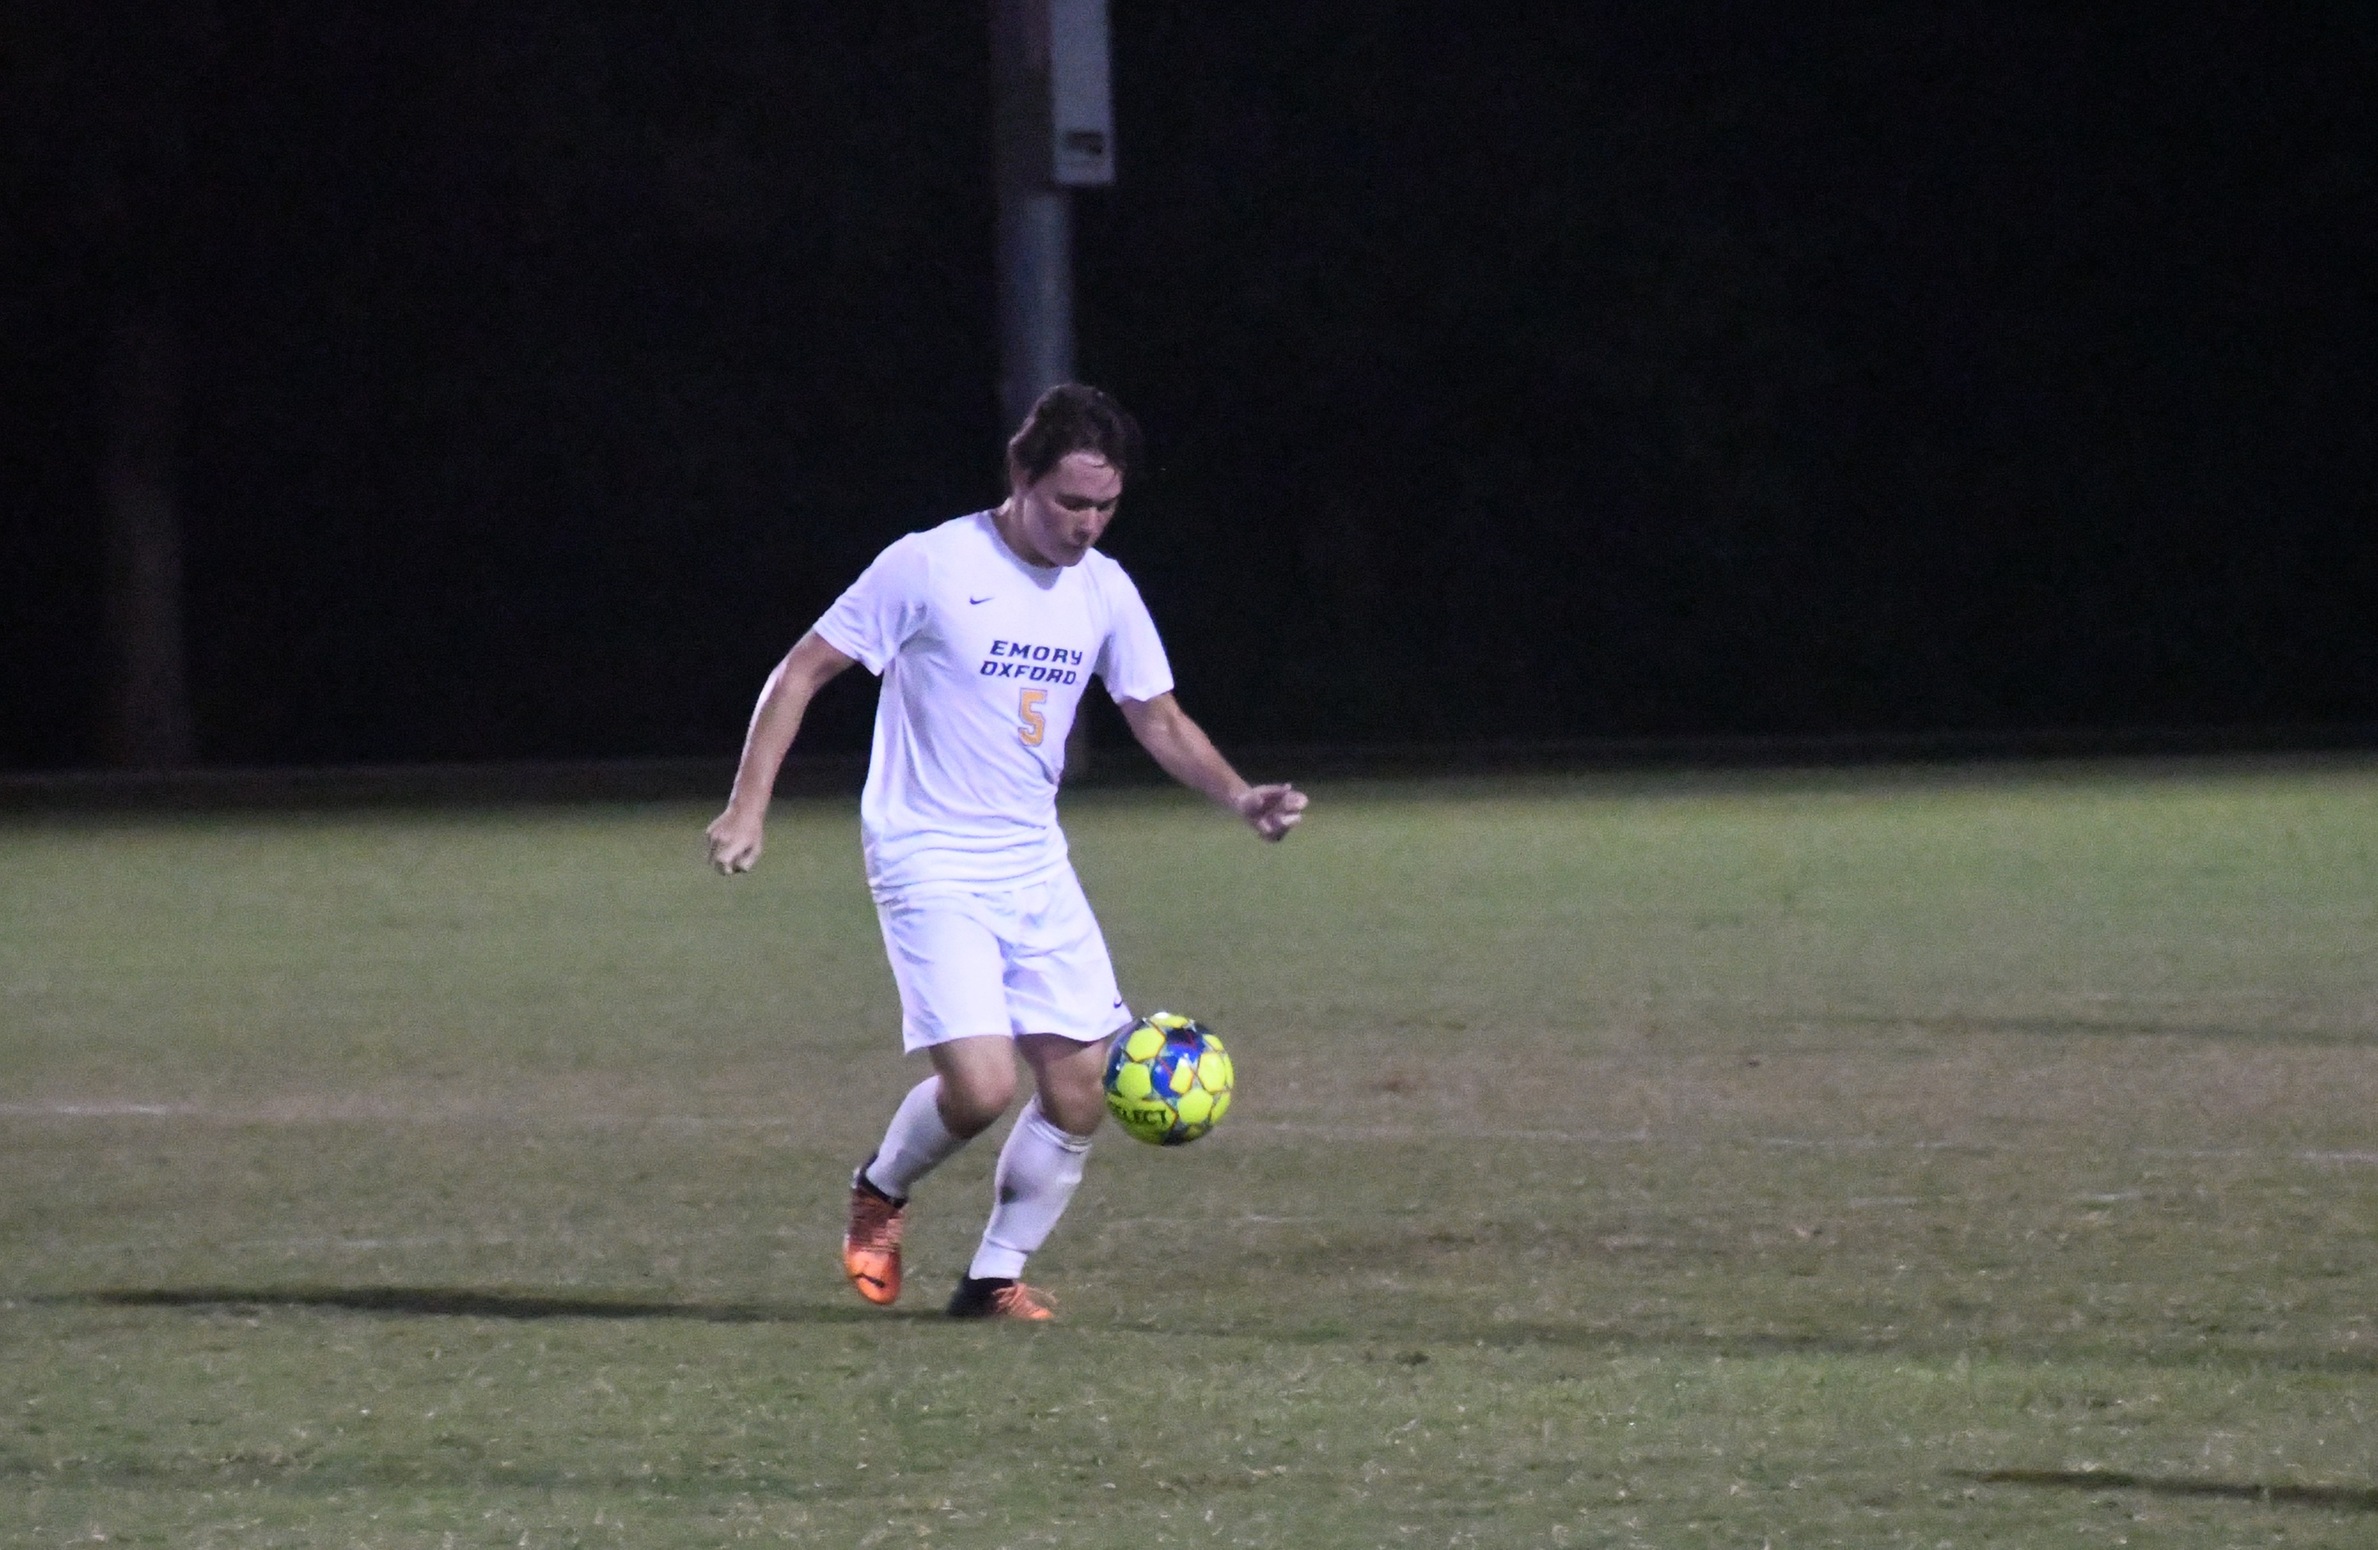 Emory Oxford Men’s Soccer Loses 1-0 to Southern Union CC